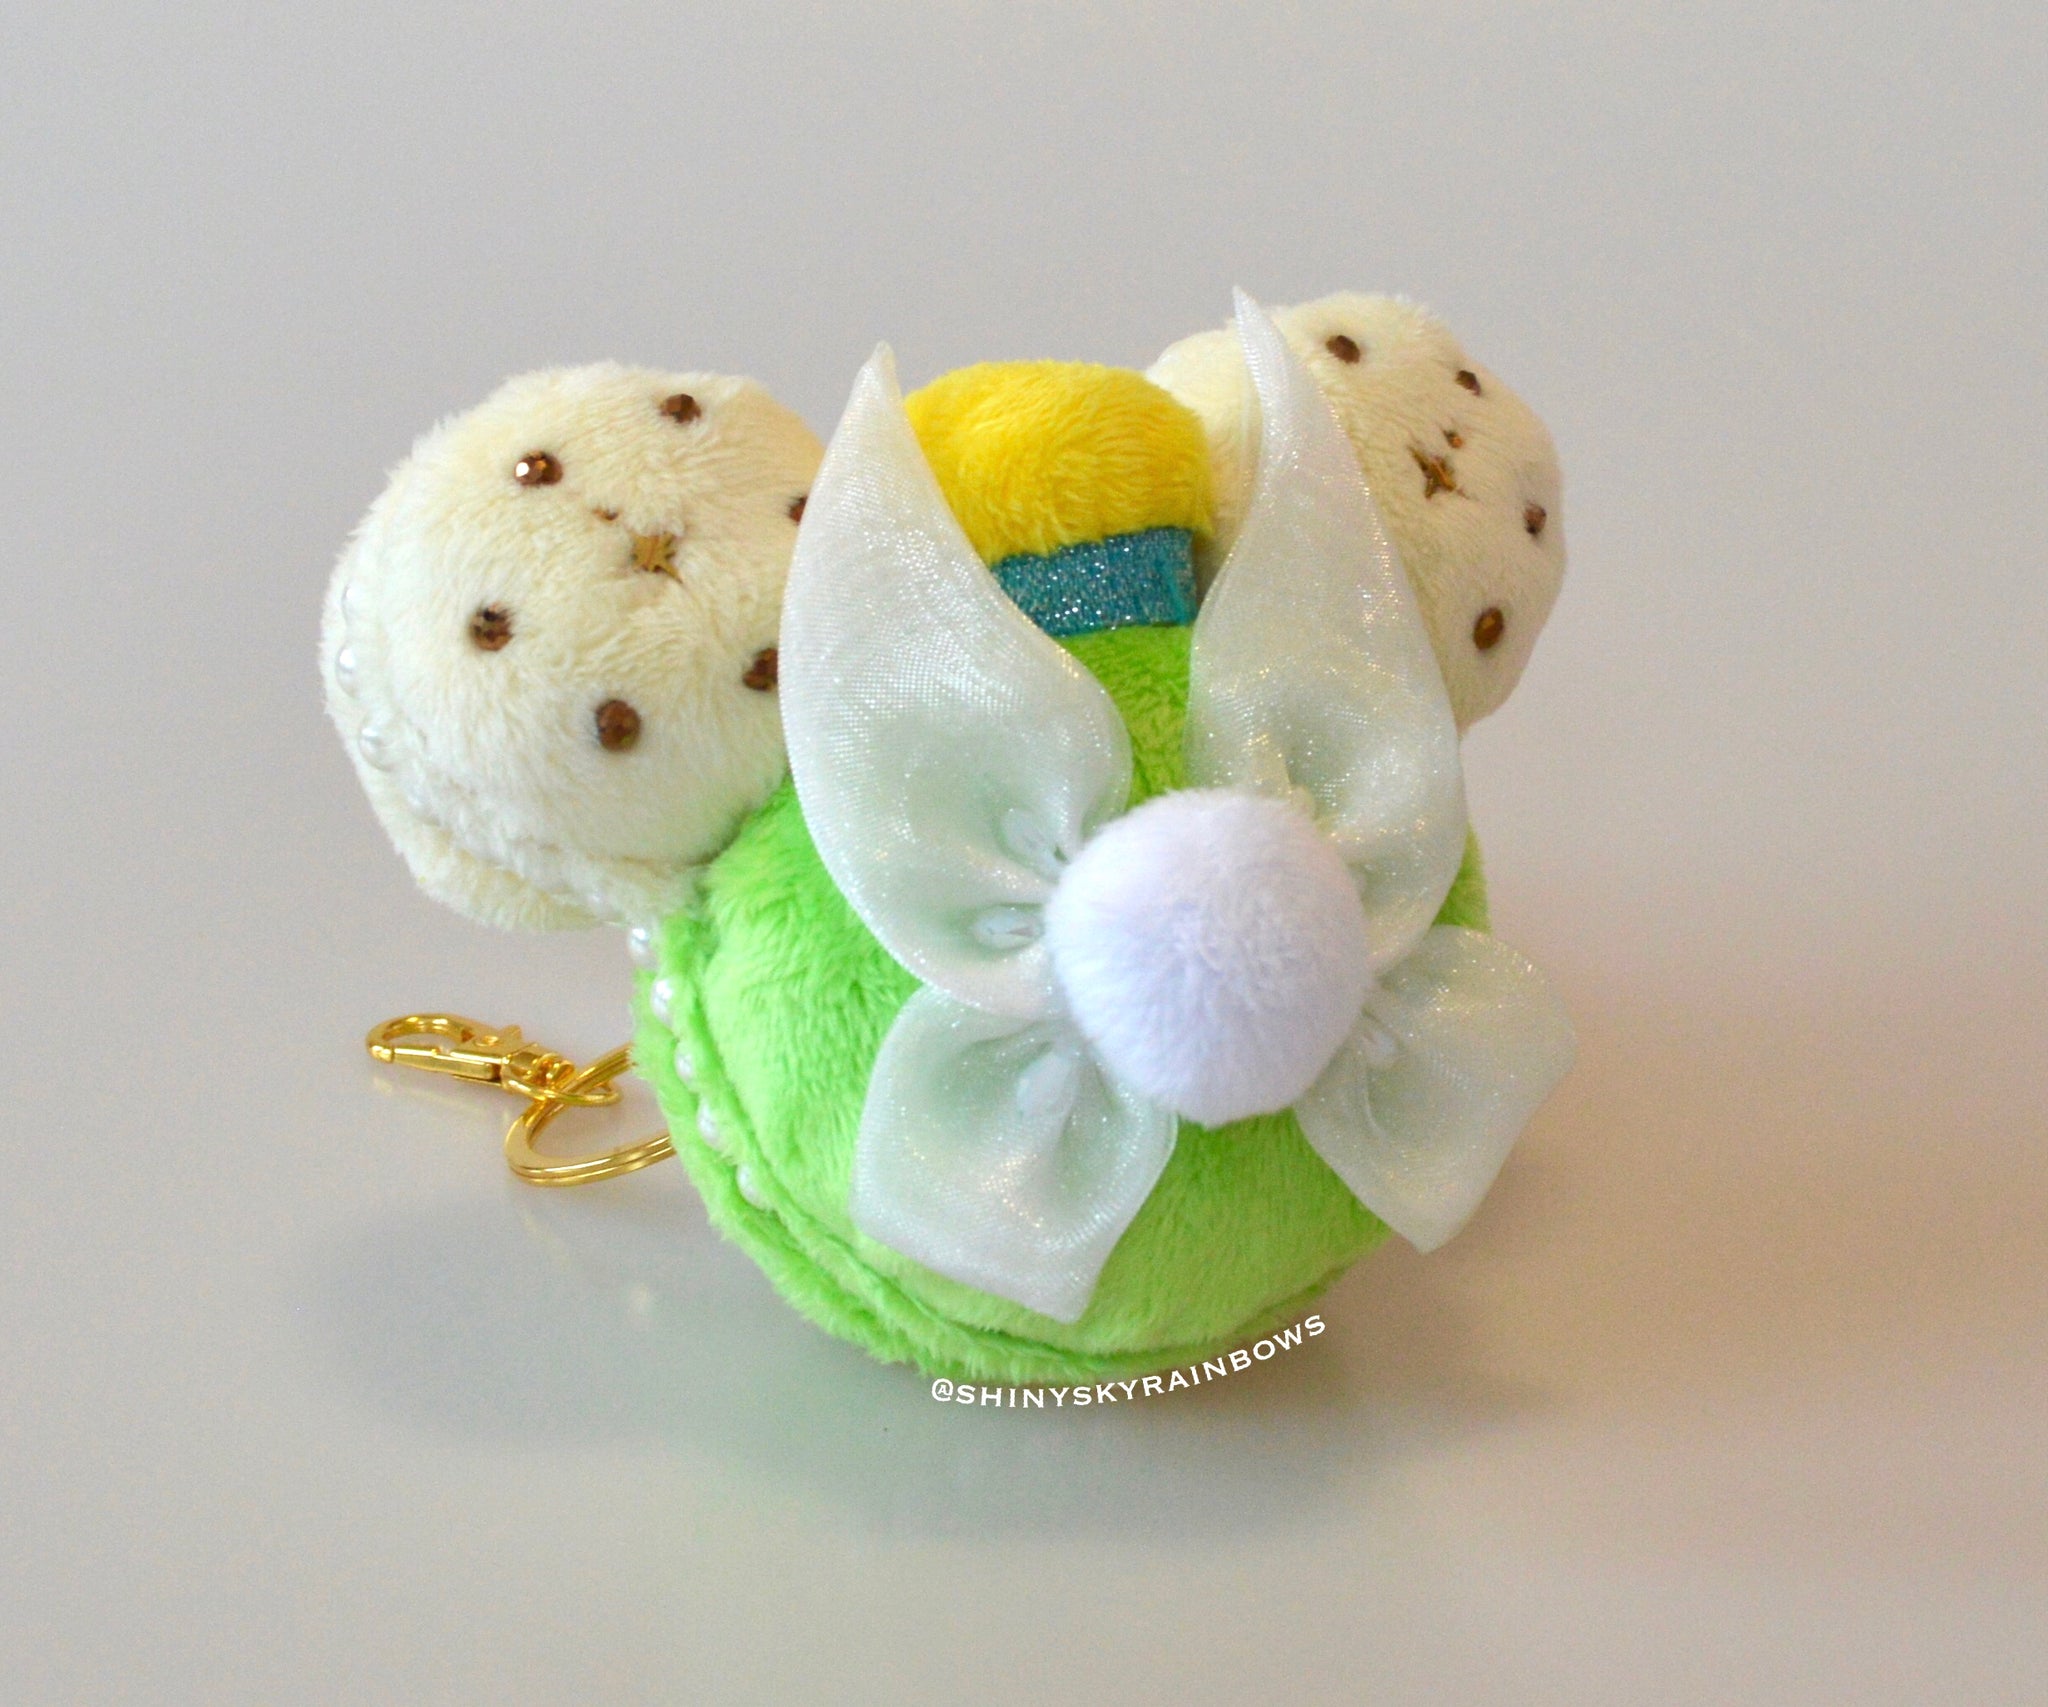 Coming soon, May 12th at 6pm PST/ Pre-order (ship in 2-4weeks) Neverland Fairy Macaron Plush accessory